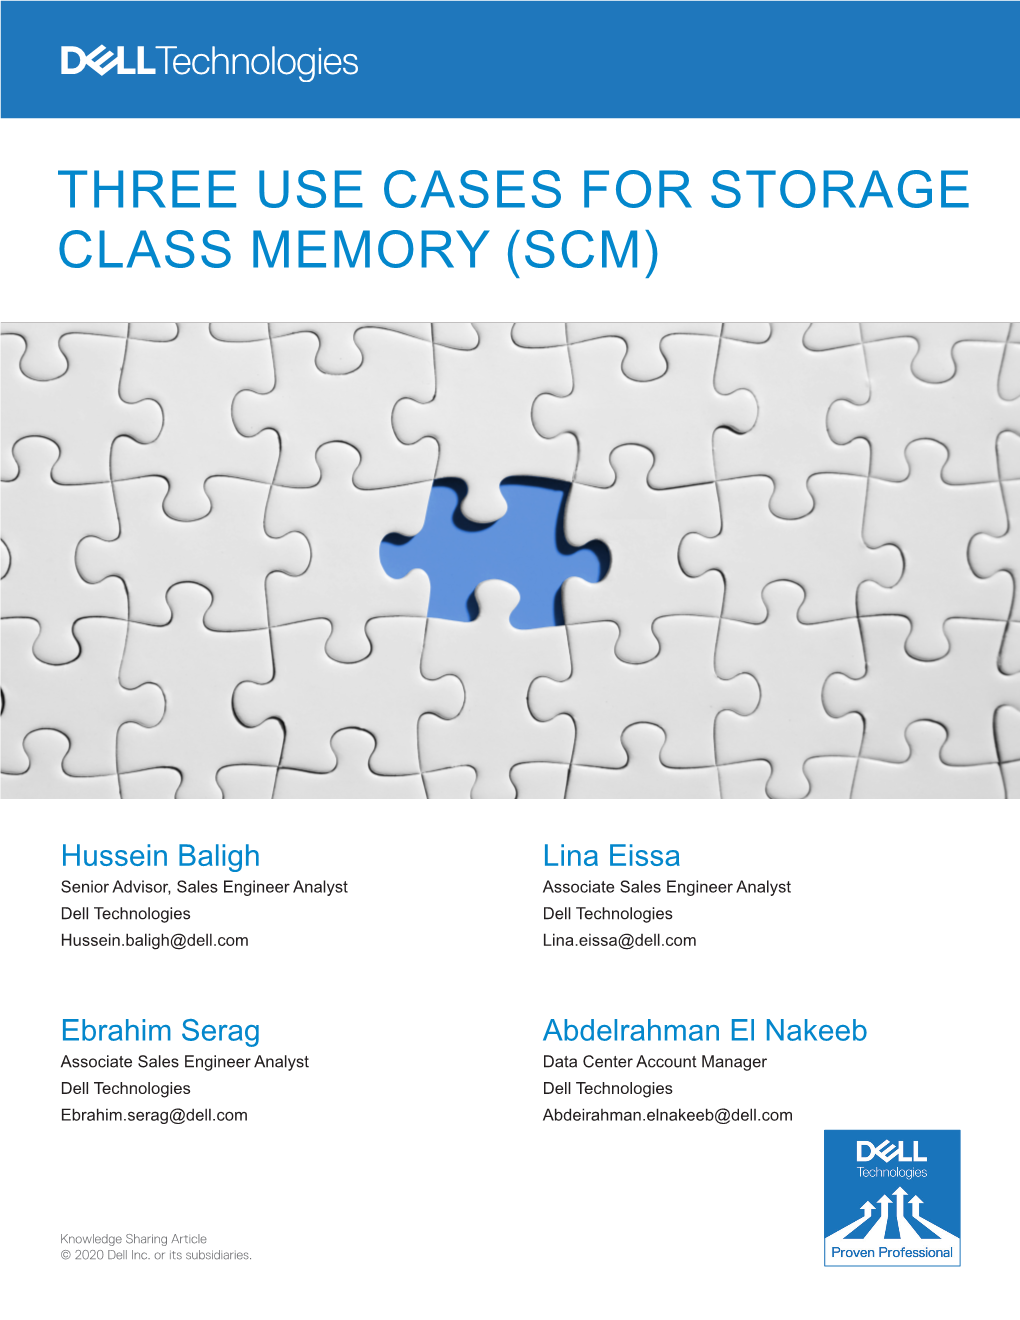 Three Use Cases for Storage Class Memory (Scm)